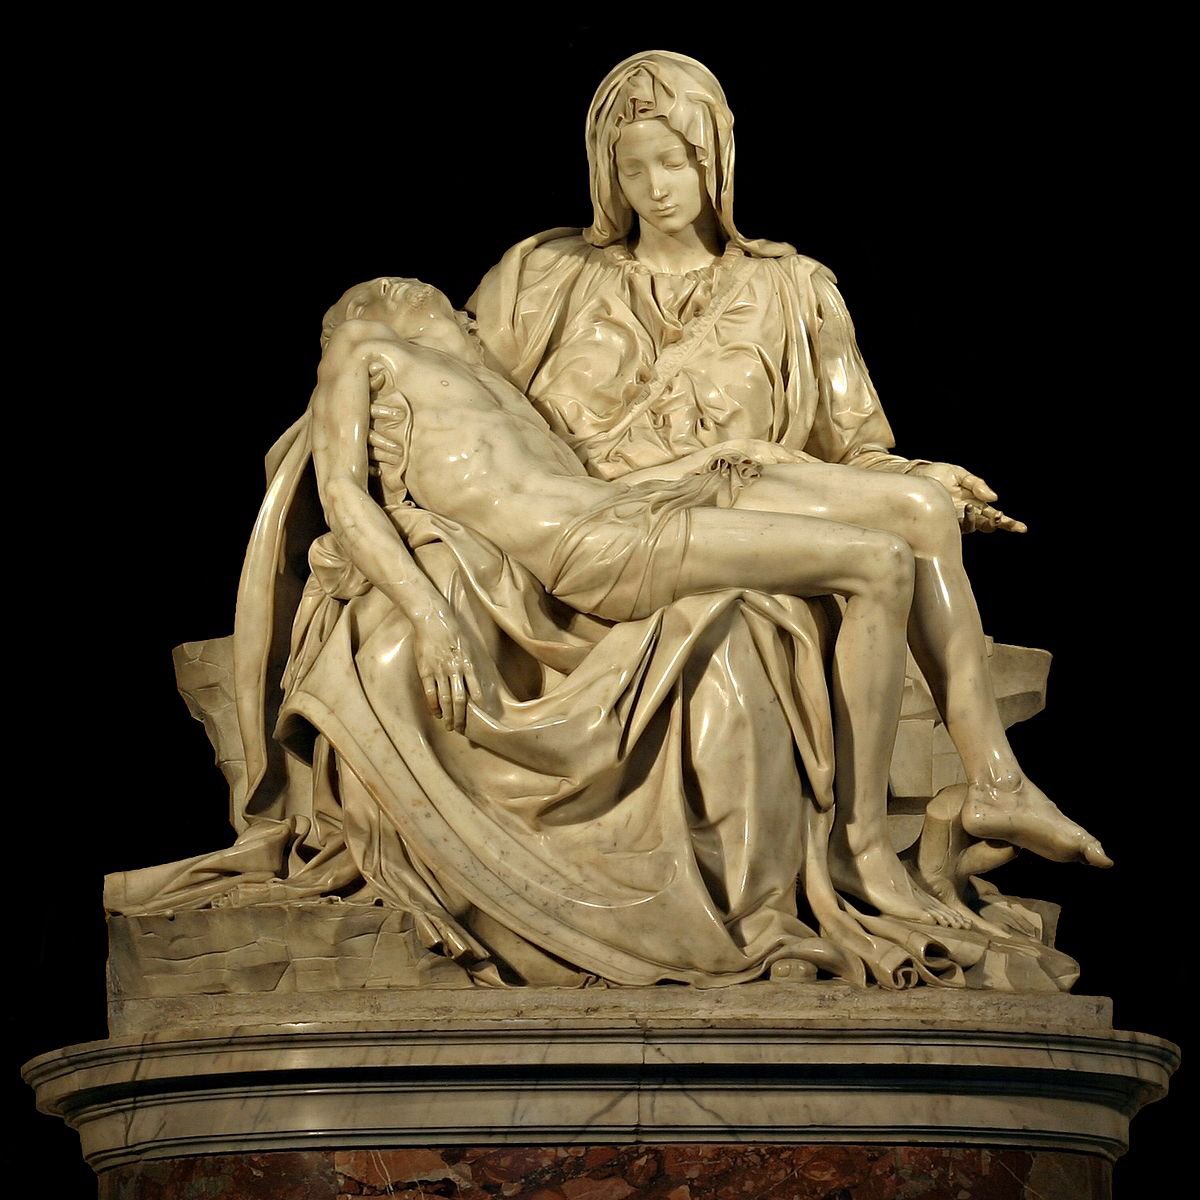 Pieta is defined as a sculptural depiction of Virgin Mary and her son, Jesus. Michelangelo’s famous depiction of Pieta was commissioned on a whim by Cardinal Jean de Bilhères-Lagraulas, a French ambassador for the Holy See, pope’s jurisdiction, for his tomb.